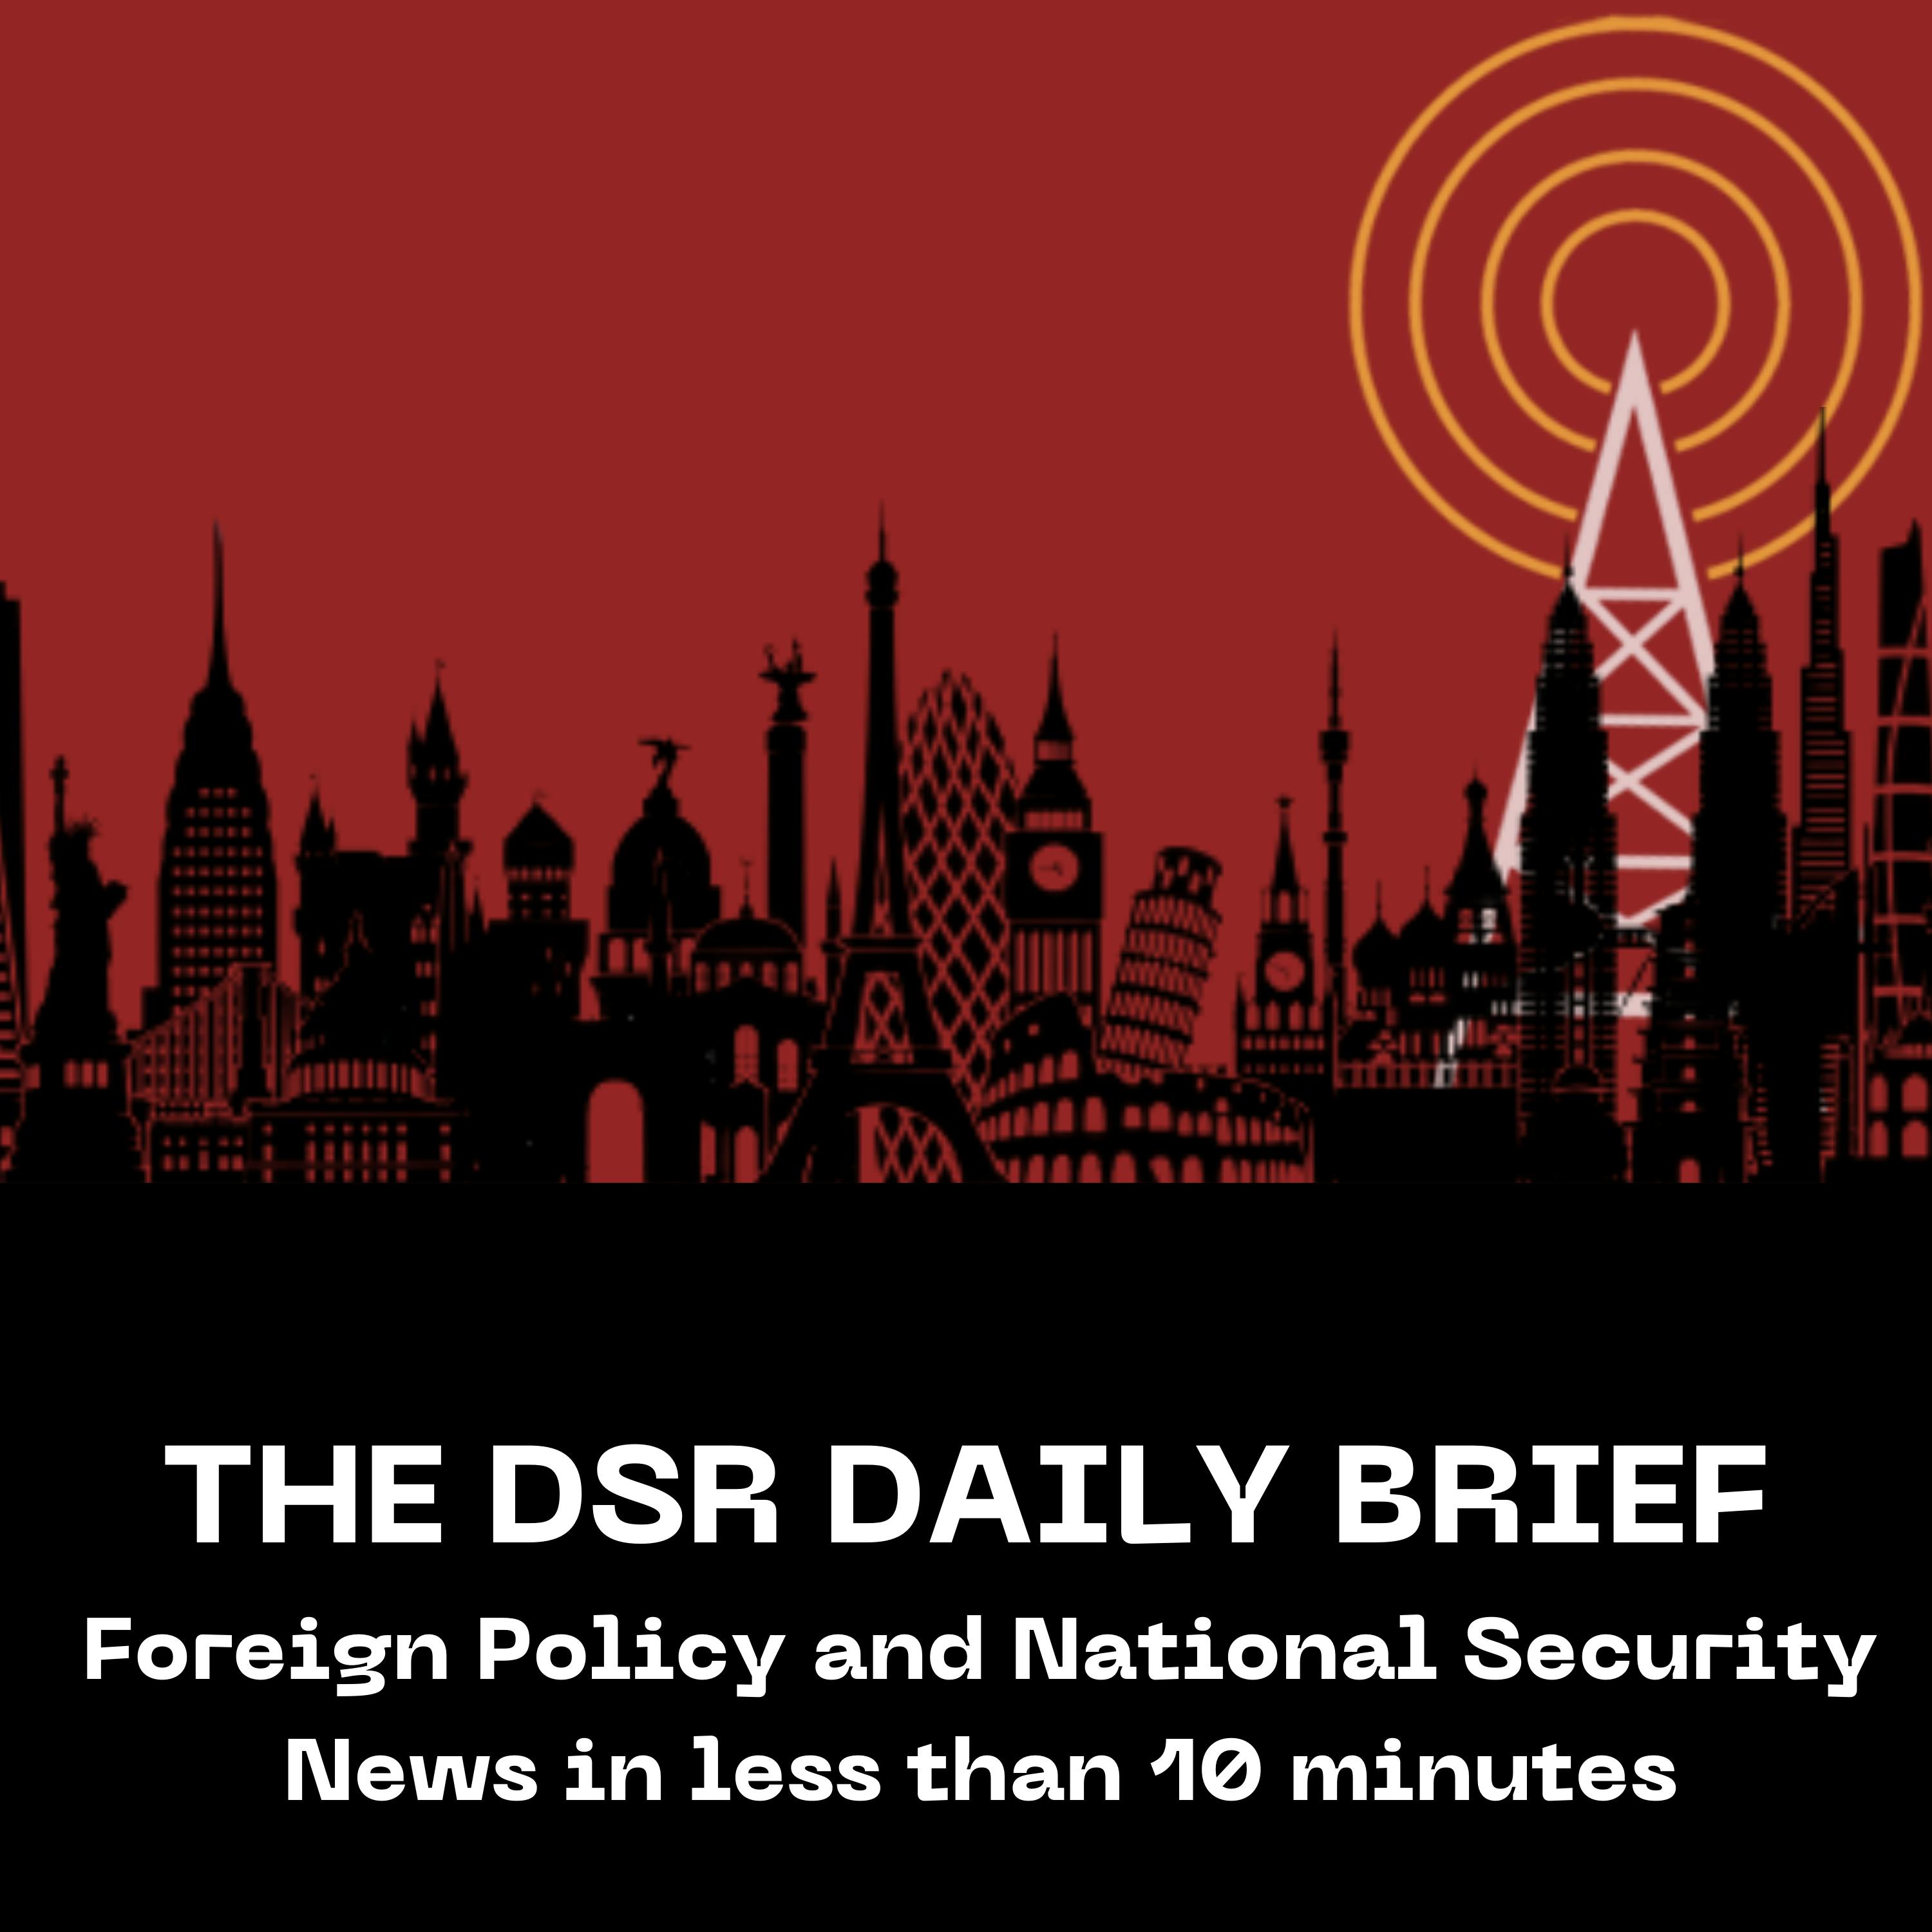 The DSR Daily for February 5 - US Senate Releases Deal on Ukraine and Border, Zelensky Confirms Potential Military Leadership Change